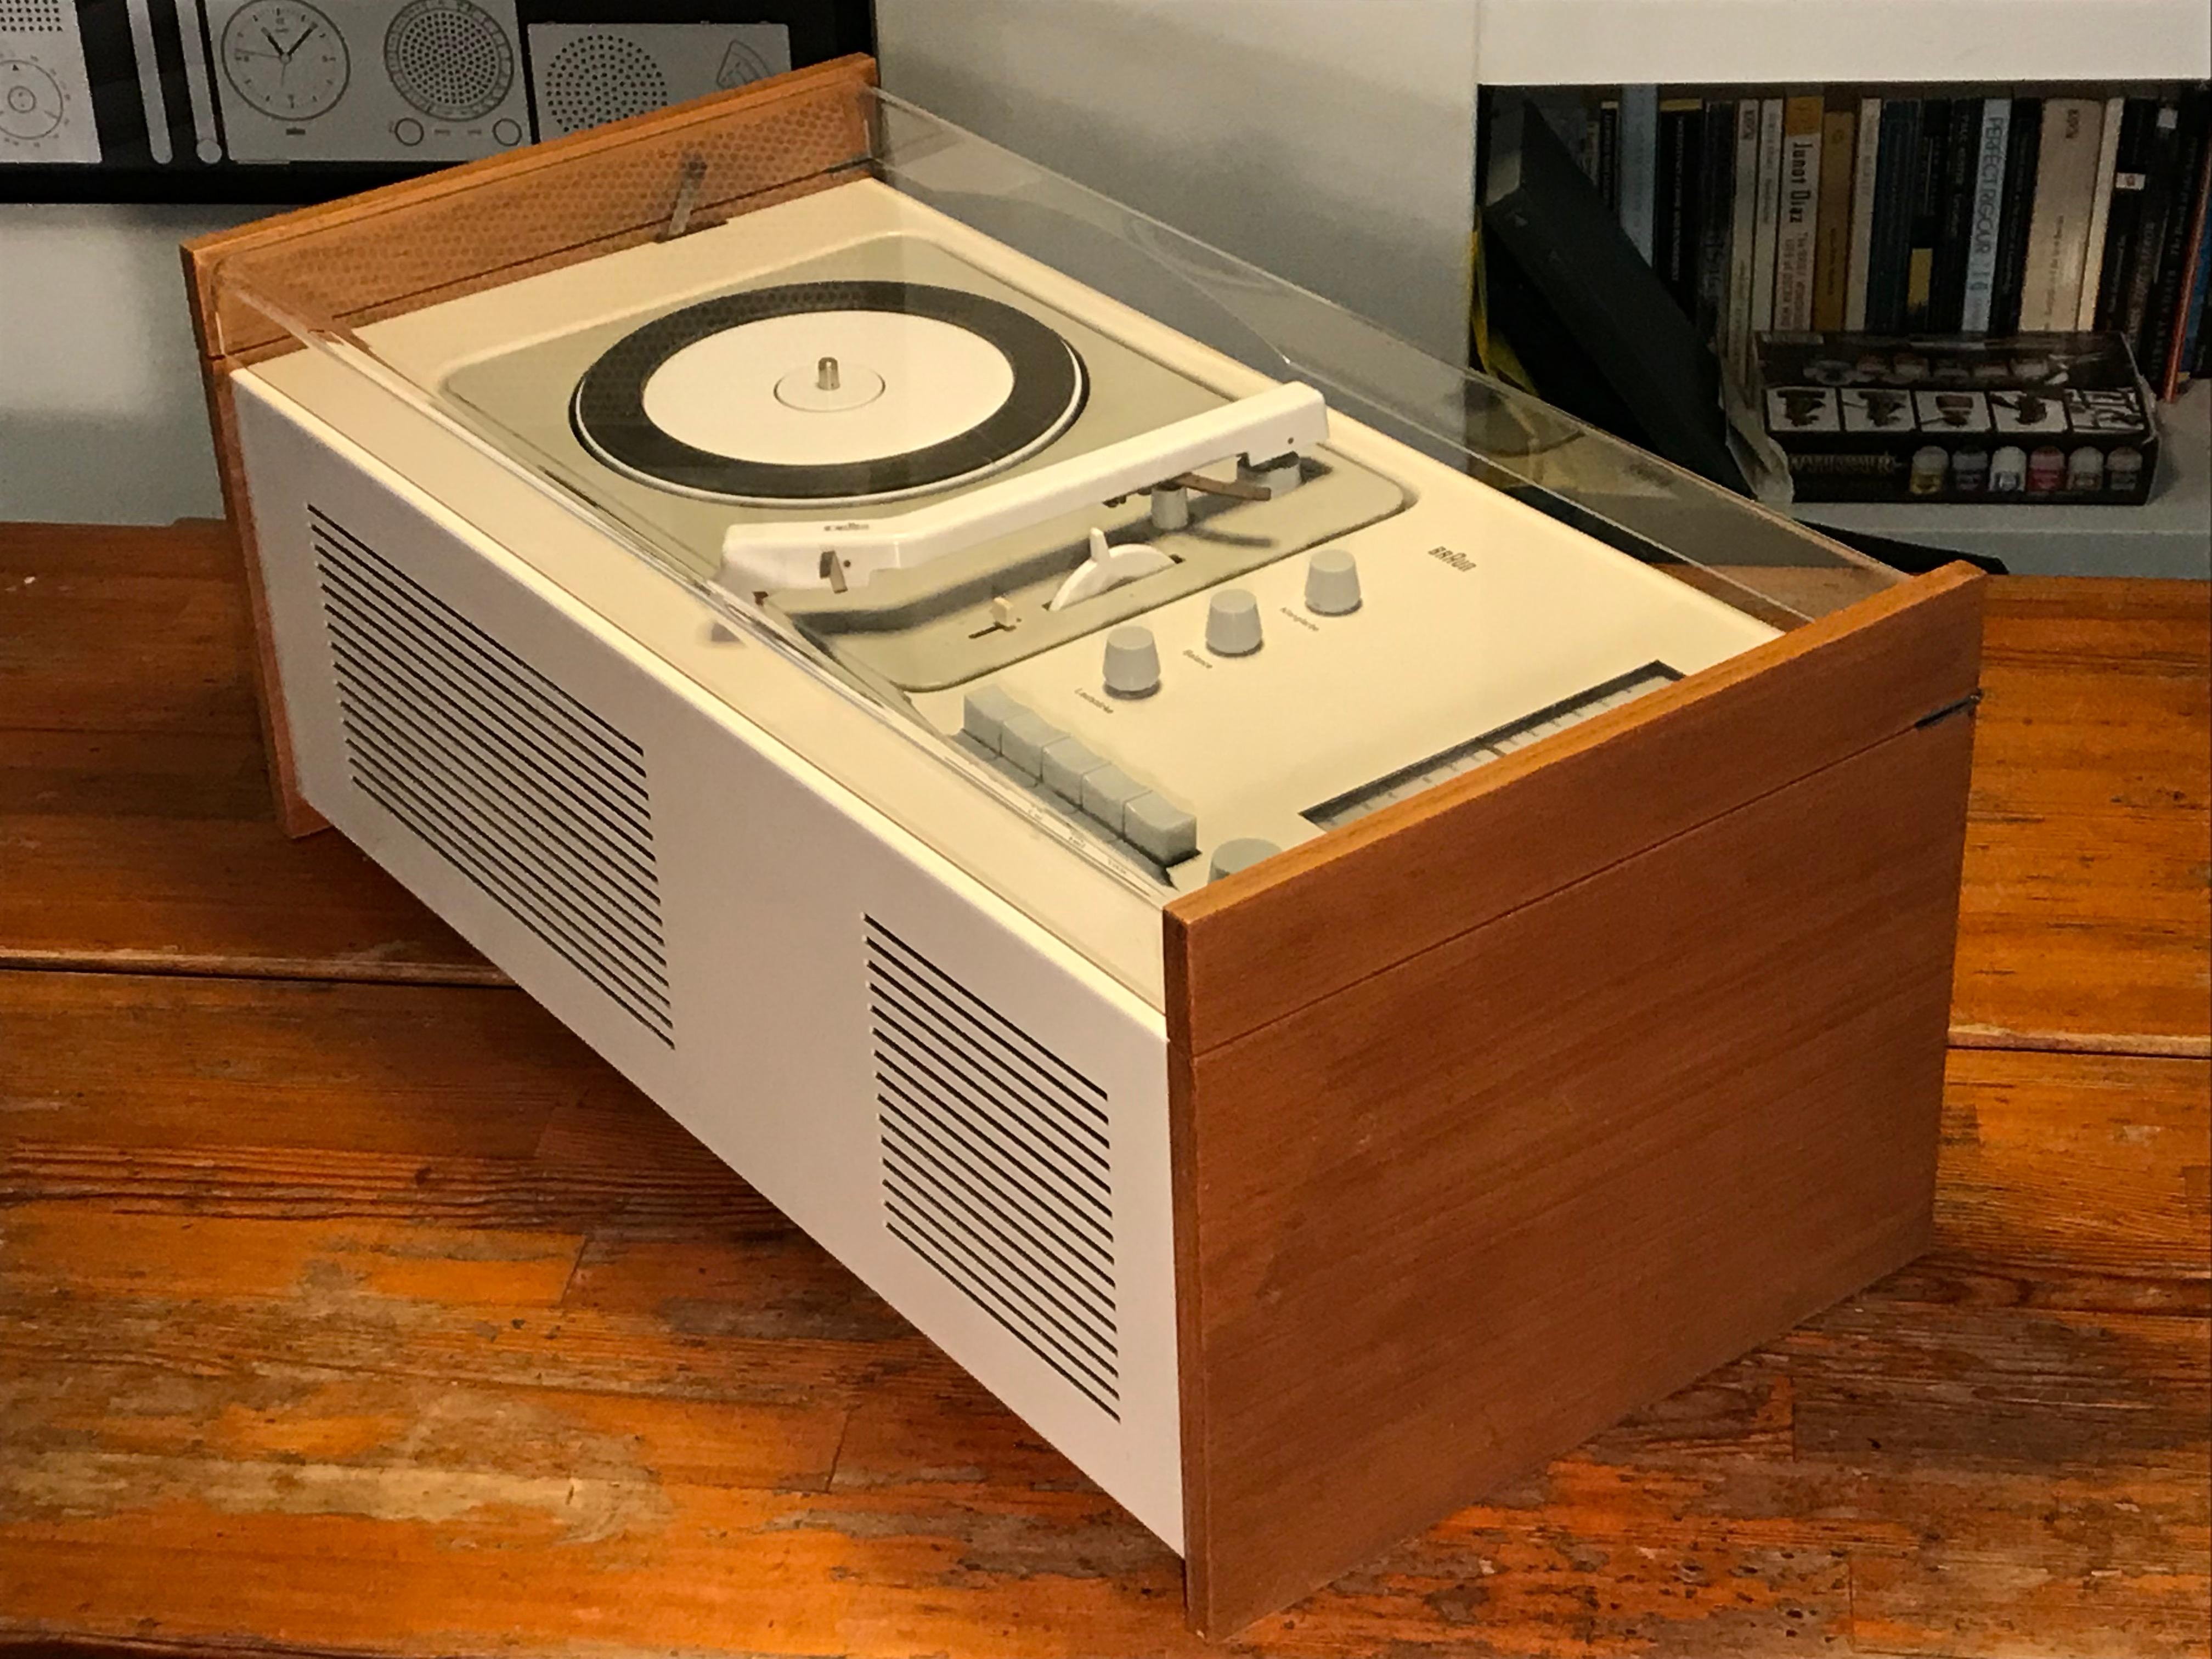 Mid-Century Modern SK61 Record Player Designed by Dieter Rams for Braun, 1966